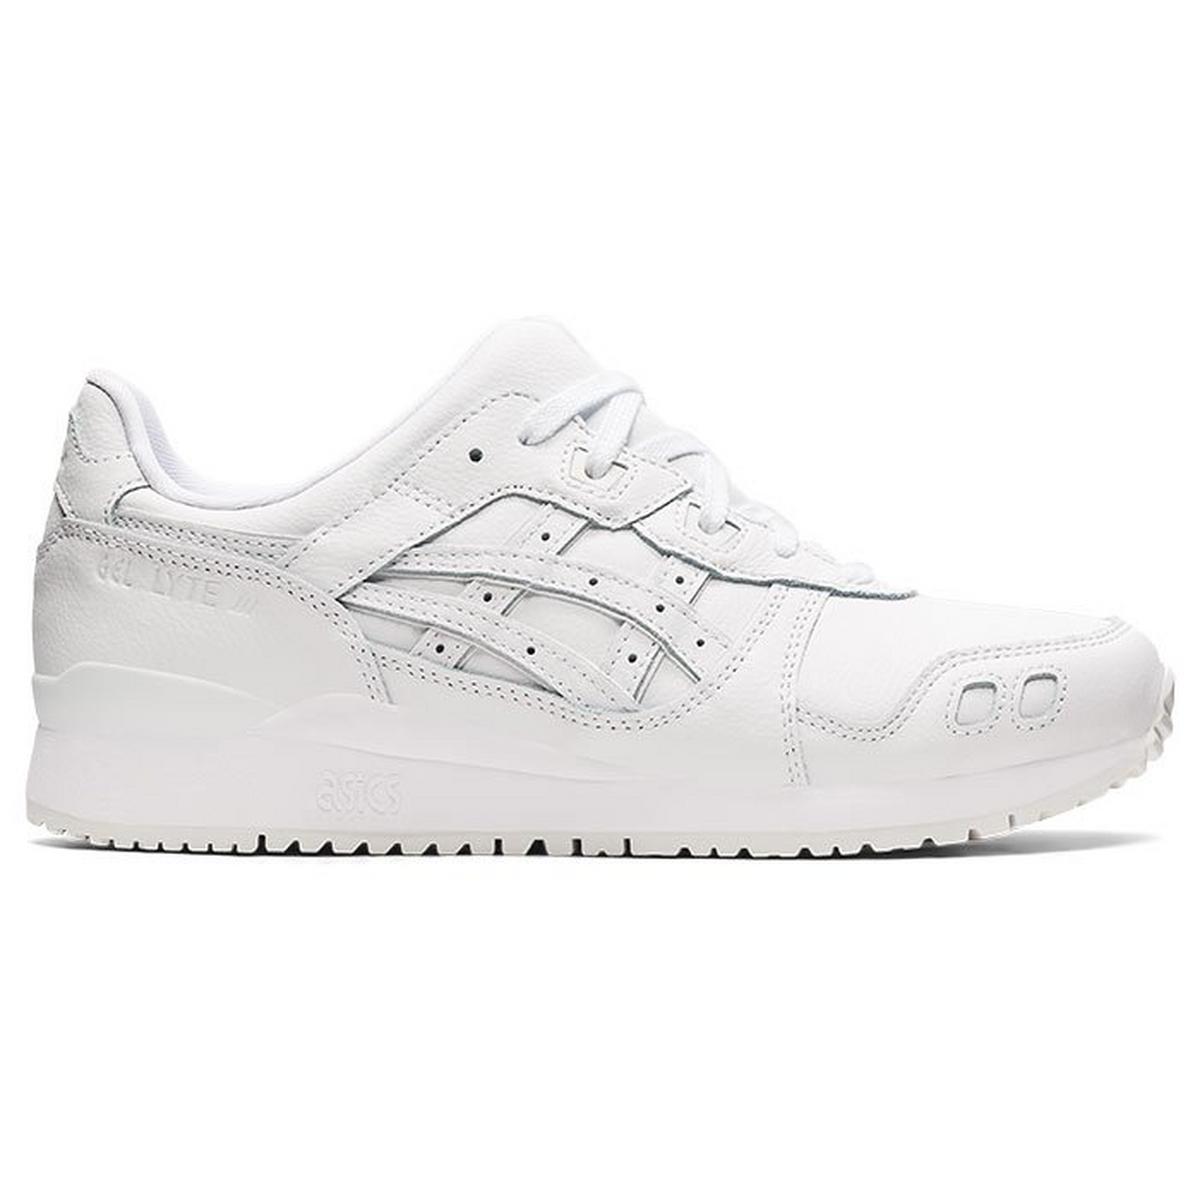 Chaussures GEL-Lyte III OG pour hommes